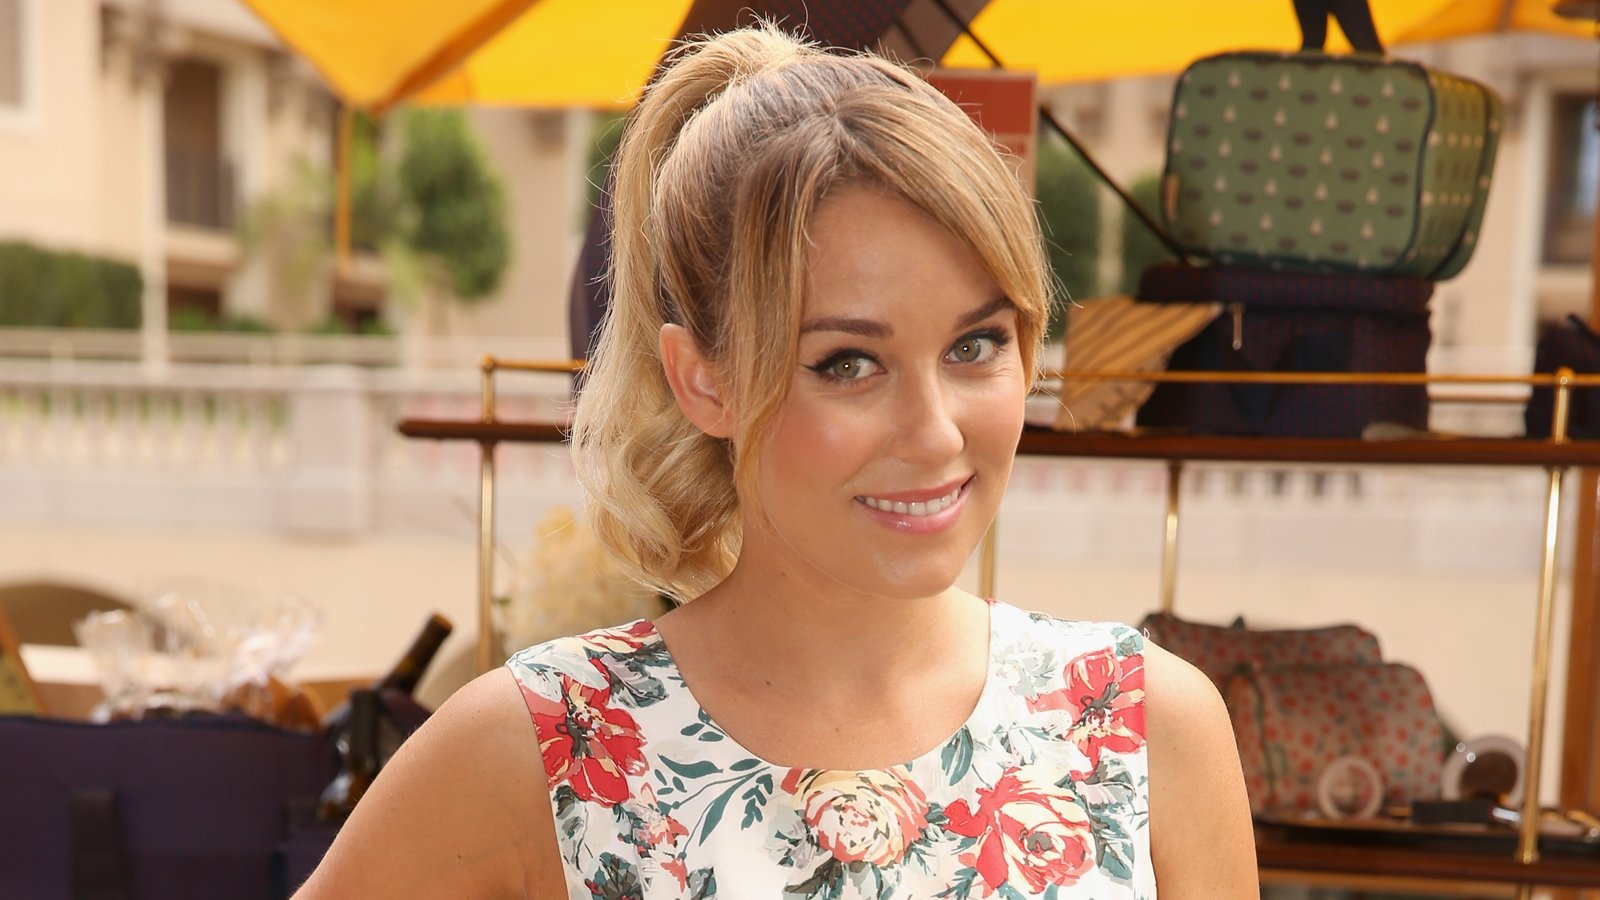 Lauren Conrad and William Tell welcome first son